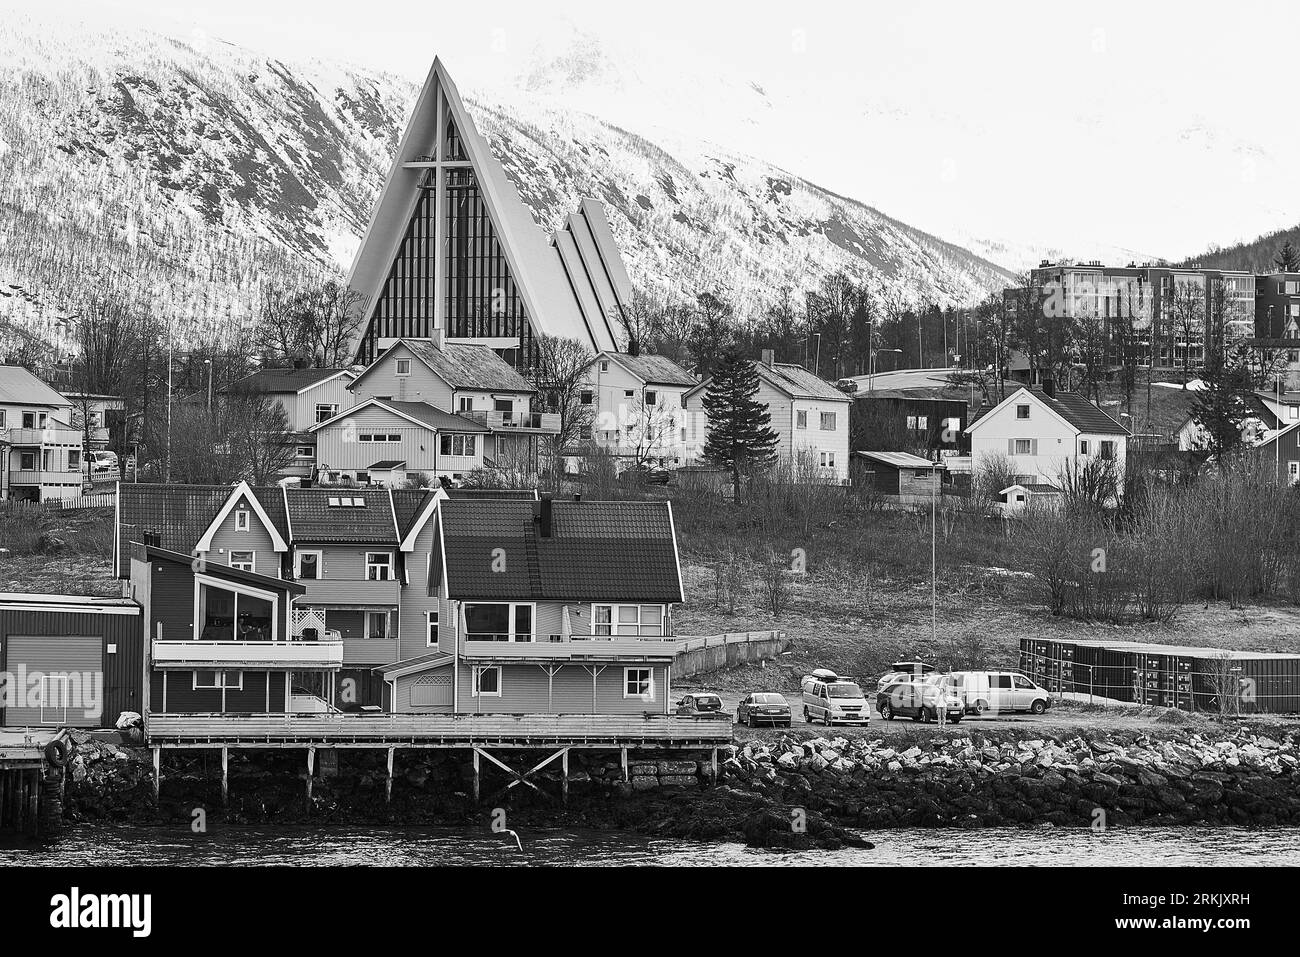 Black And White Photo Of The Arctic Cathedral (Tromsdalen Kirke, Ishavskatedralen), Or 'The Cathedral of the Arctic Ocean' On The Tromsøysundet Strait Stock Photo